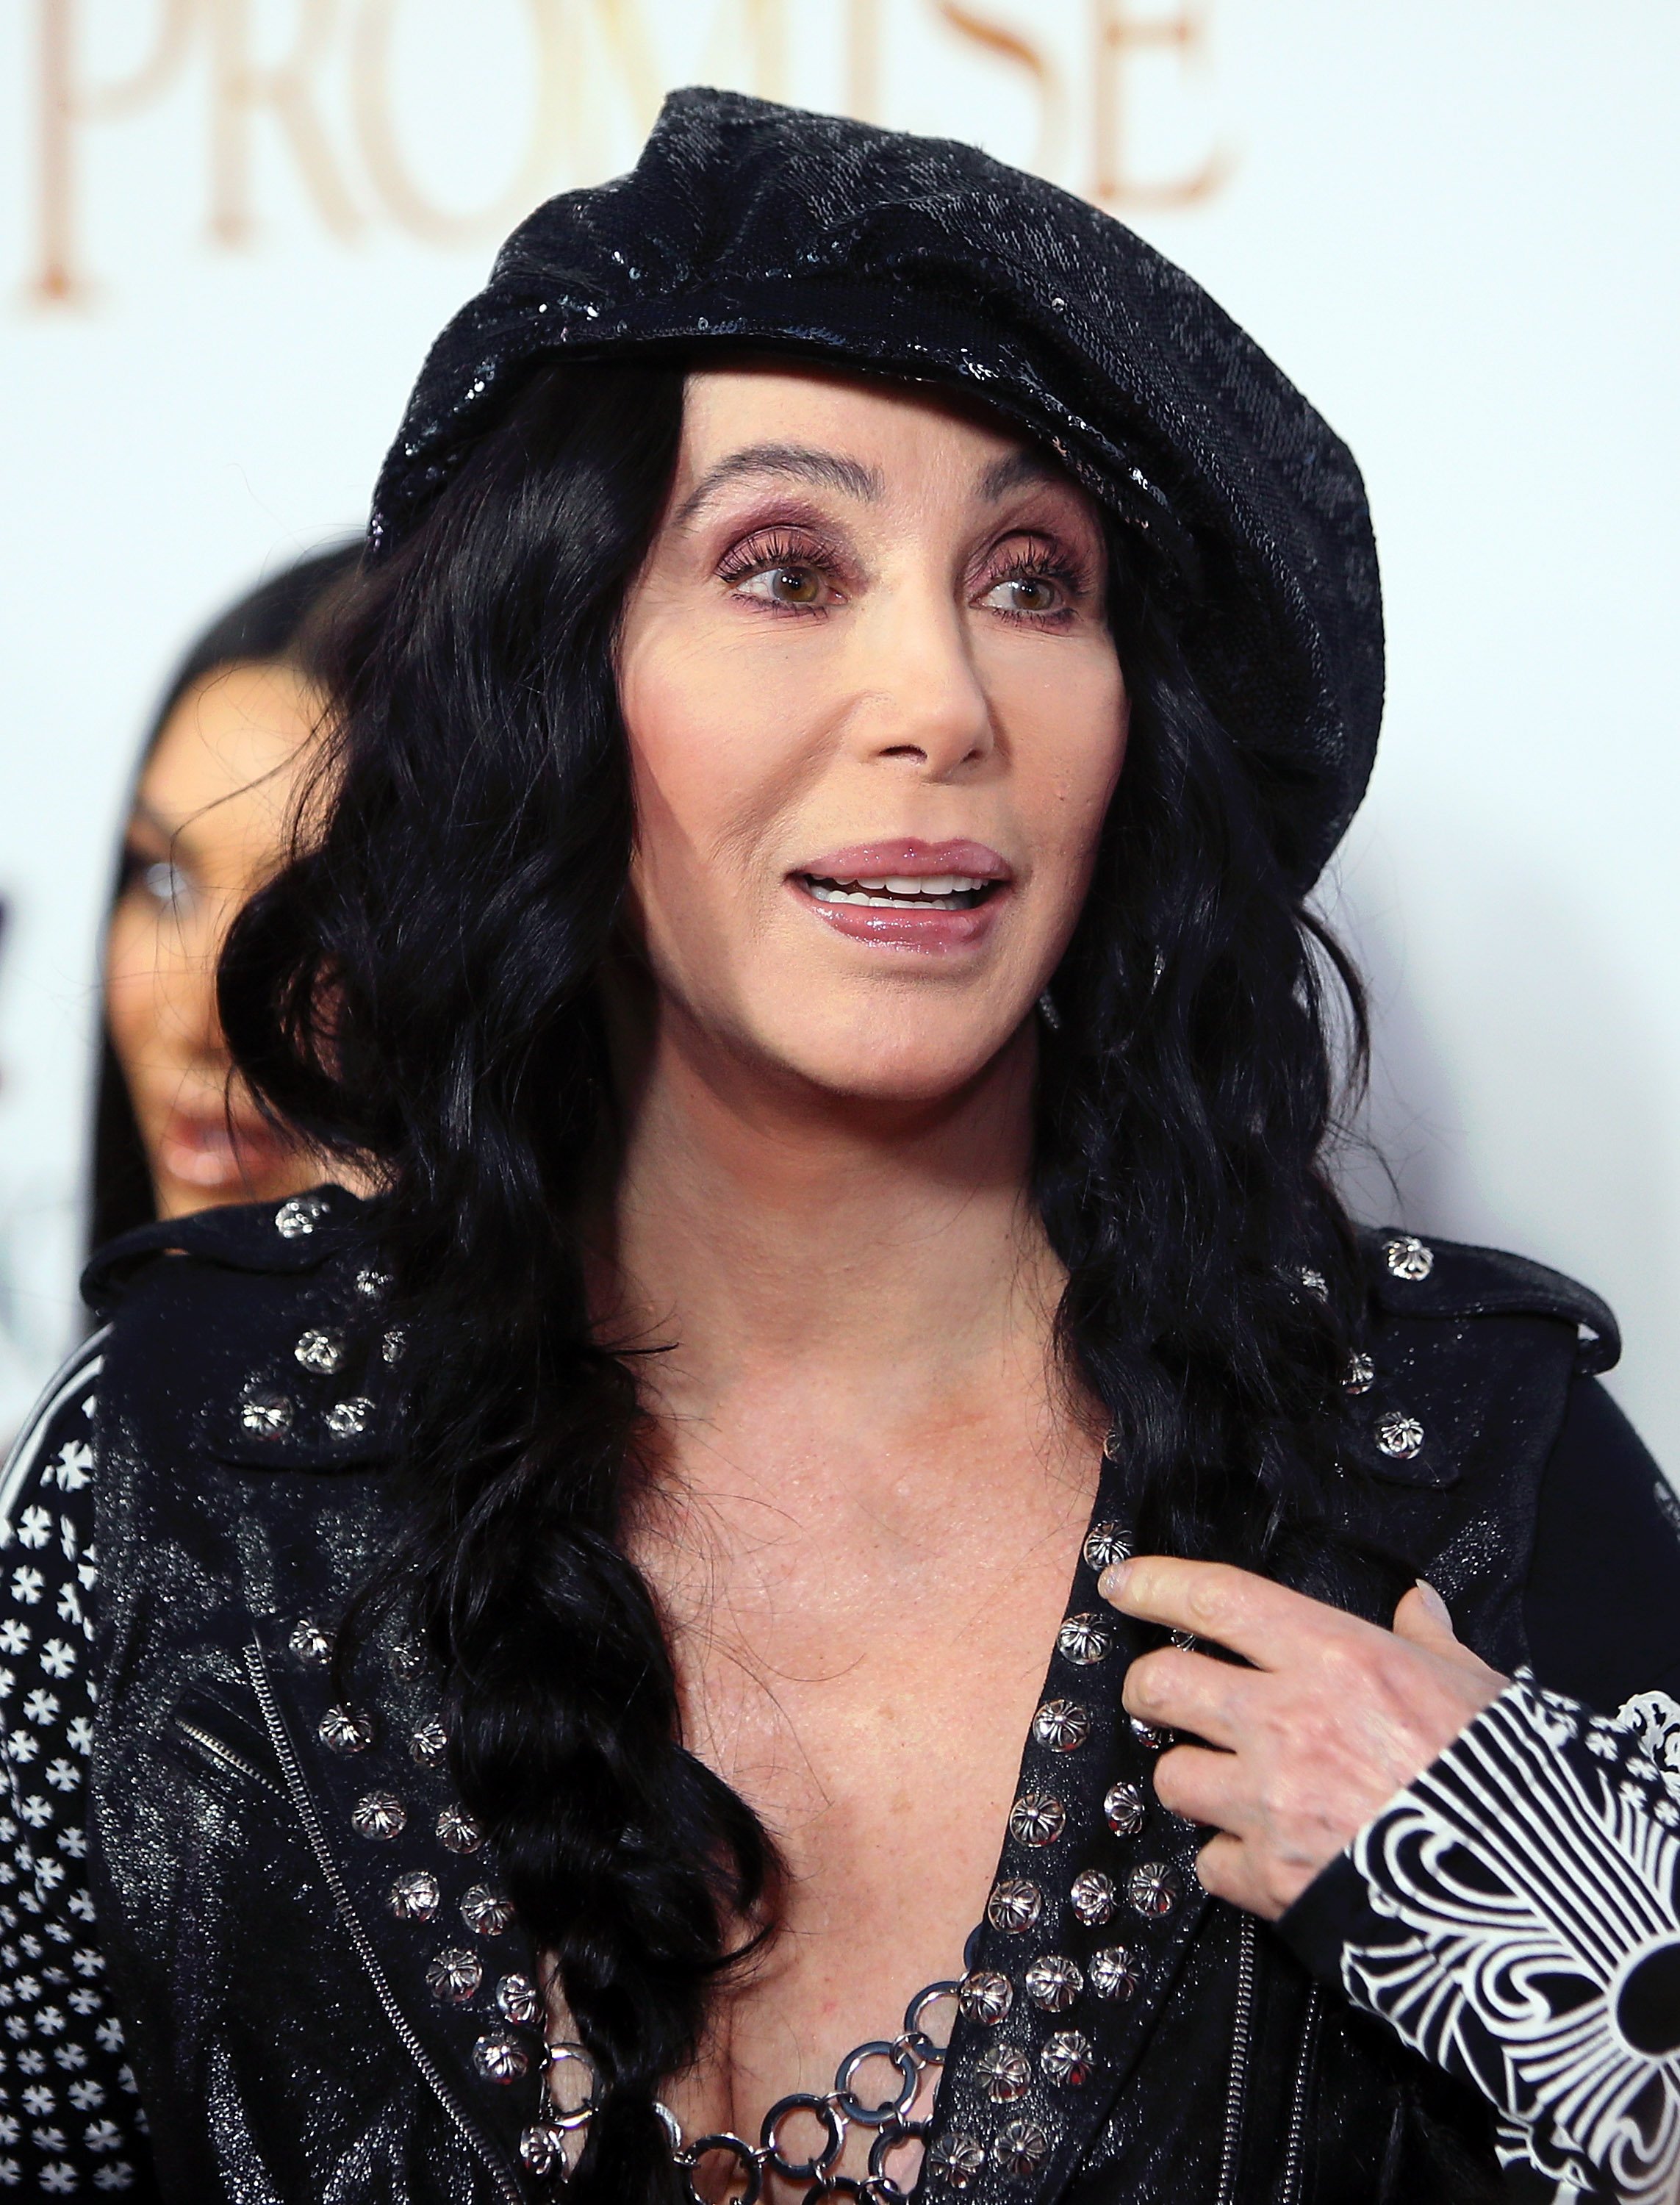 Cher pictured at the premiere of Open Road Films' "The Promise" at TCL Chinese Theatre, 2017, California. | Photo: Getty Images